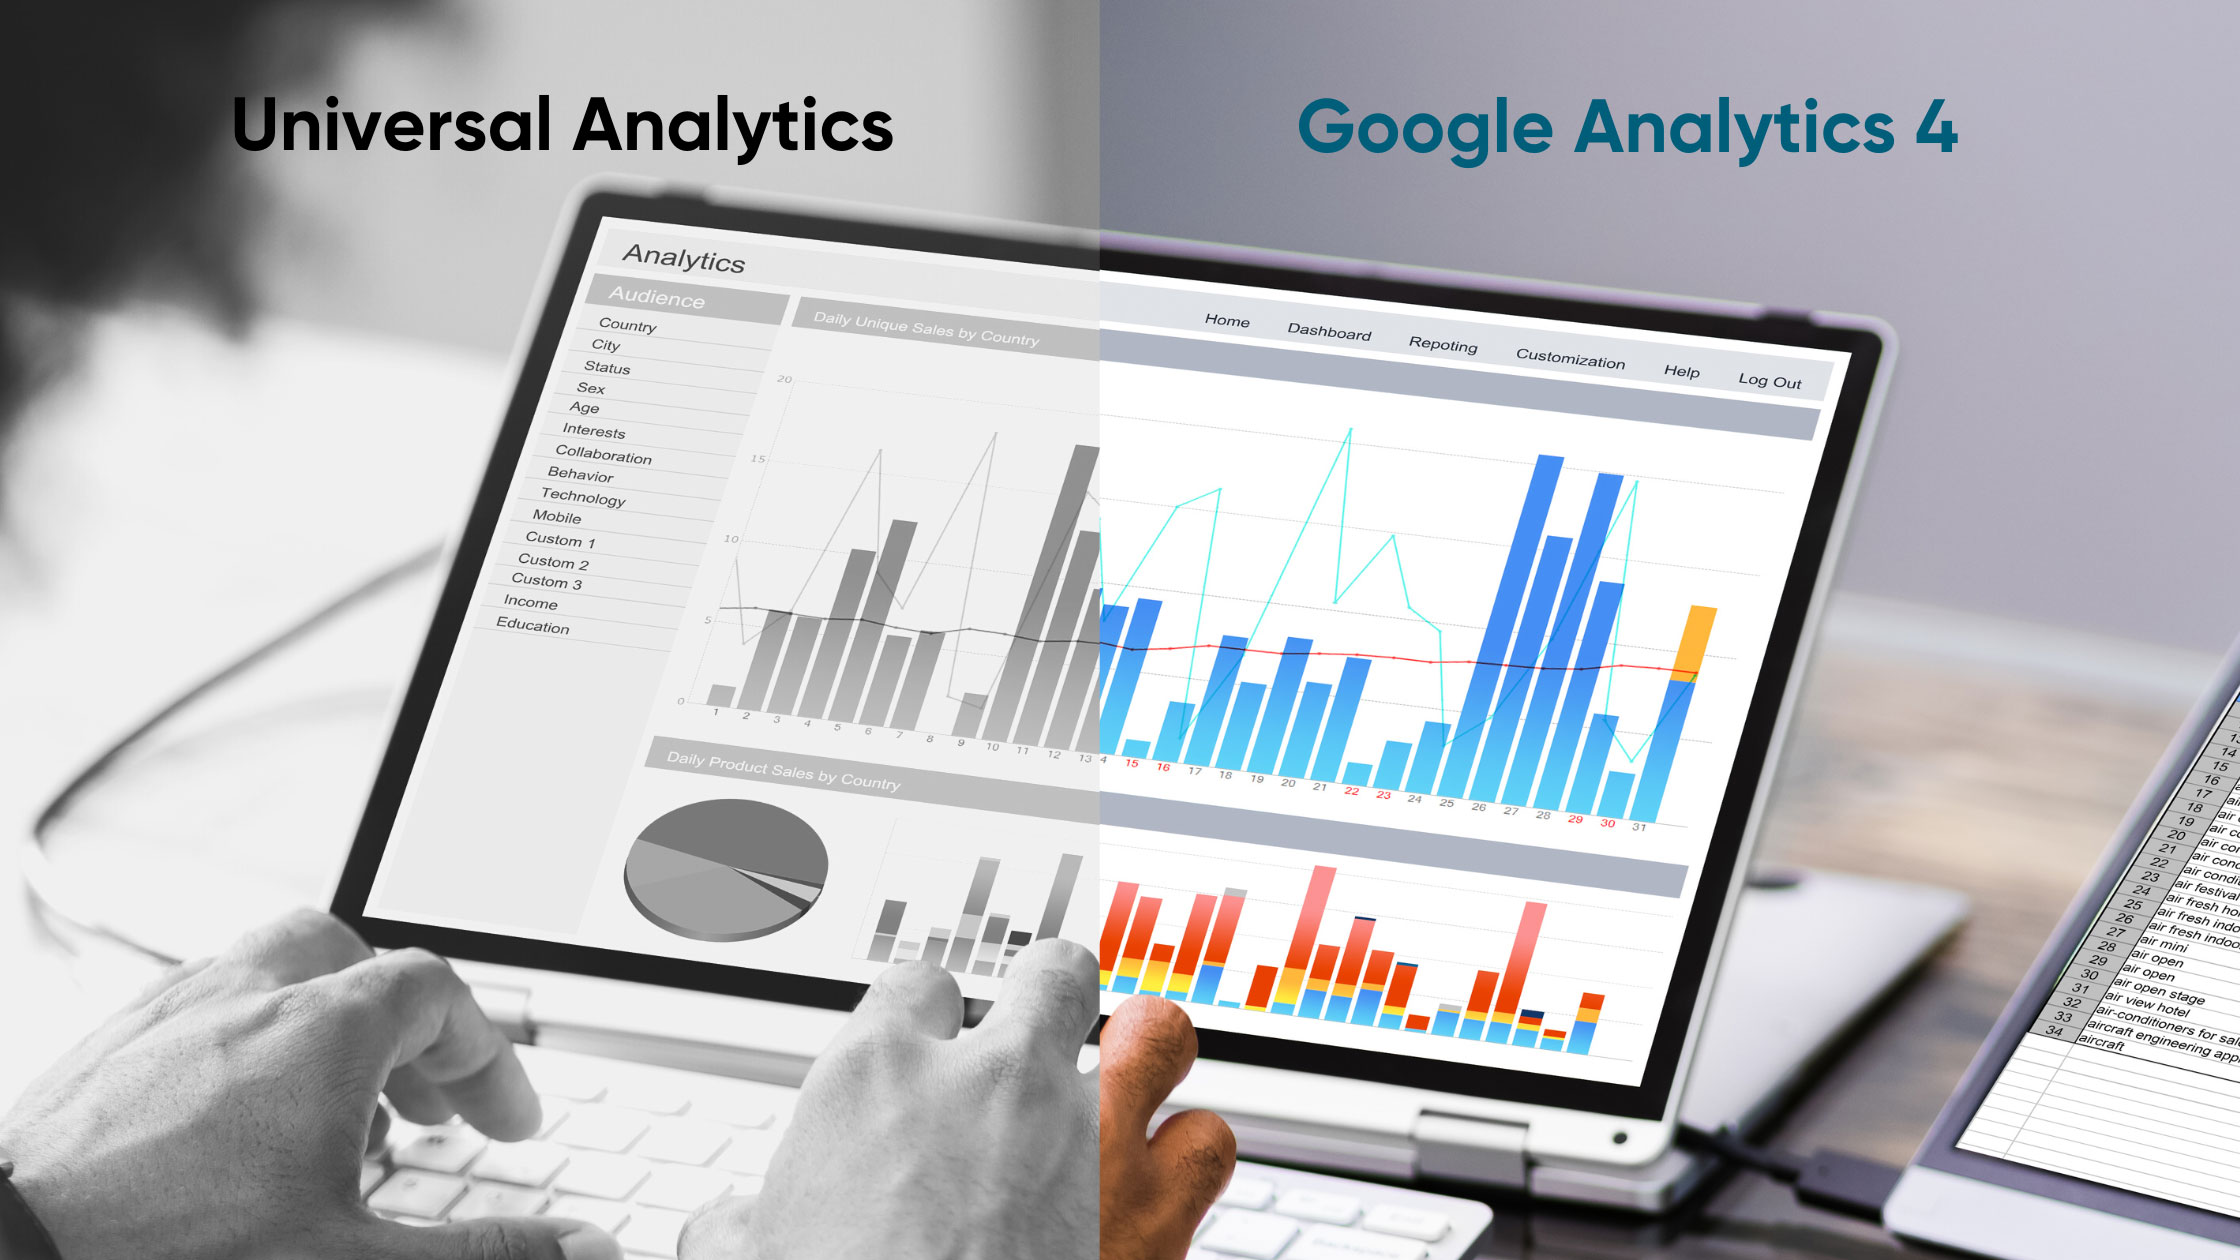 What is the difference between Google Analytics 4 and Universal Analytics?